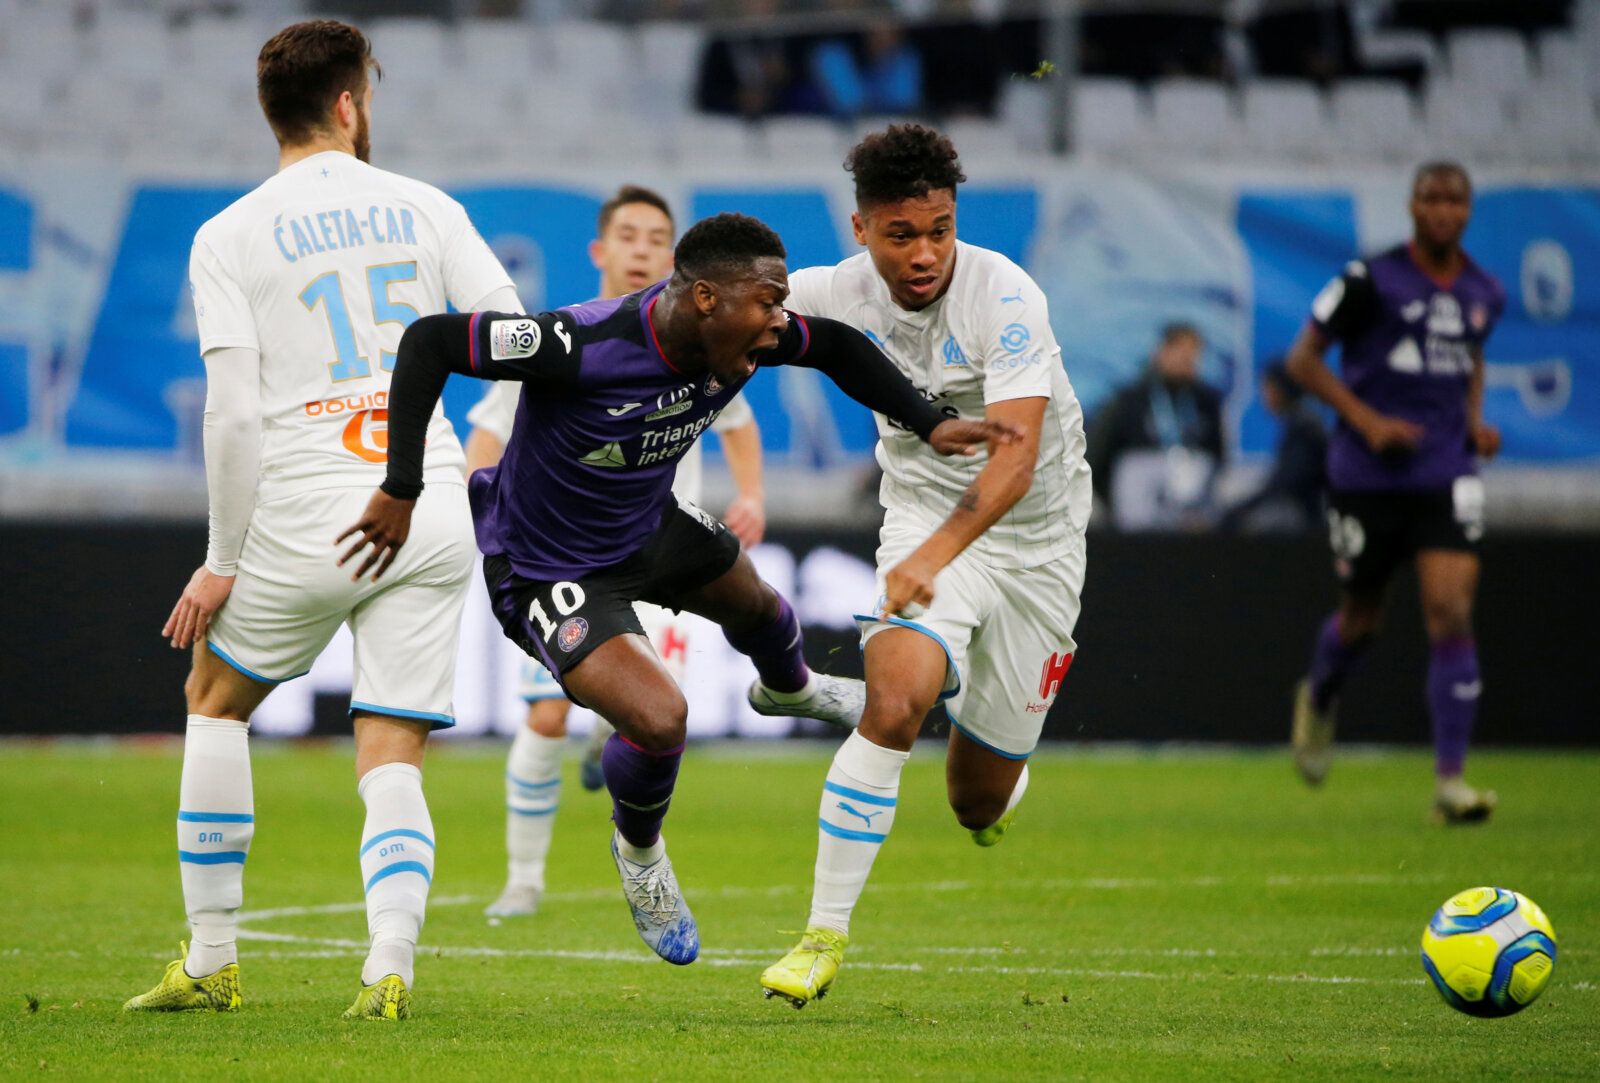 Soccer Football - Ligue 1 - Olympique de Marseille v Toulouse - Orange Velodrome, Marseille, France - February 8, 2020  Toulouse's Aaron Leya Iseka in action with Olympique de Marseille's Duje Caleta Car and Boubacar Kamara   REUTERS/Jean-Paul Pelissier